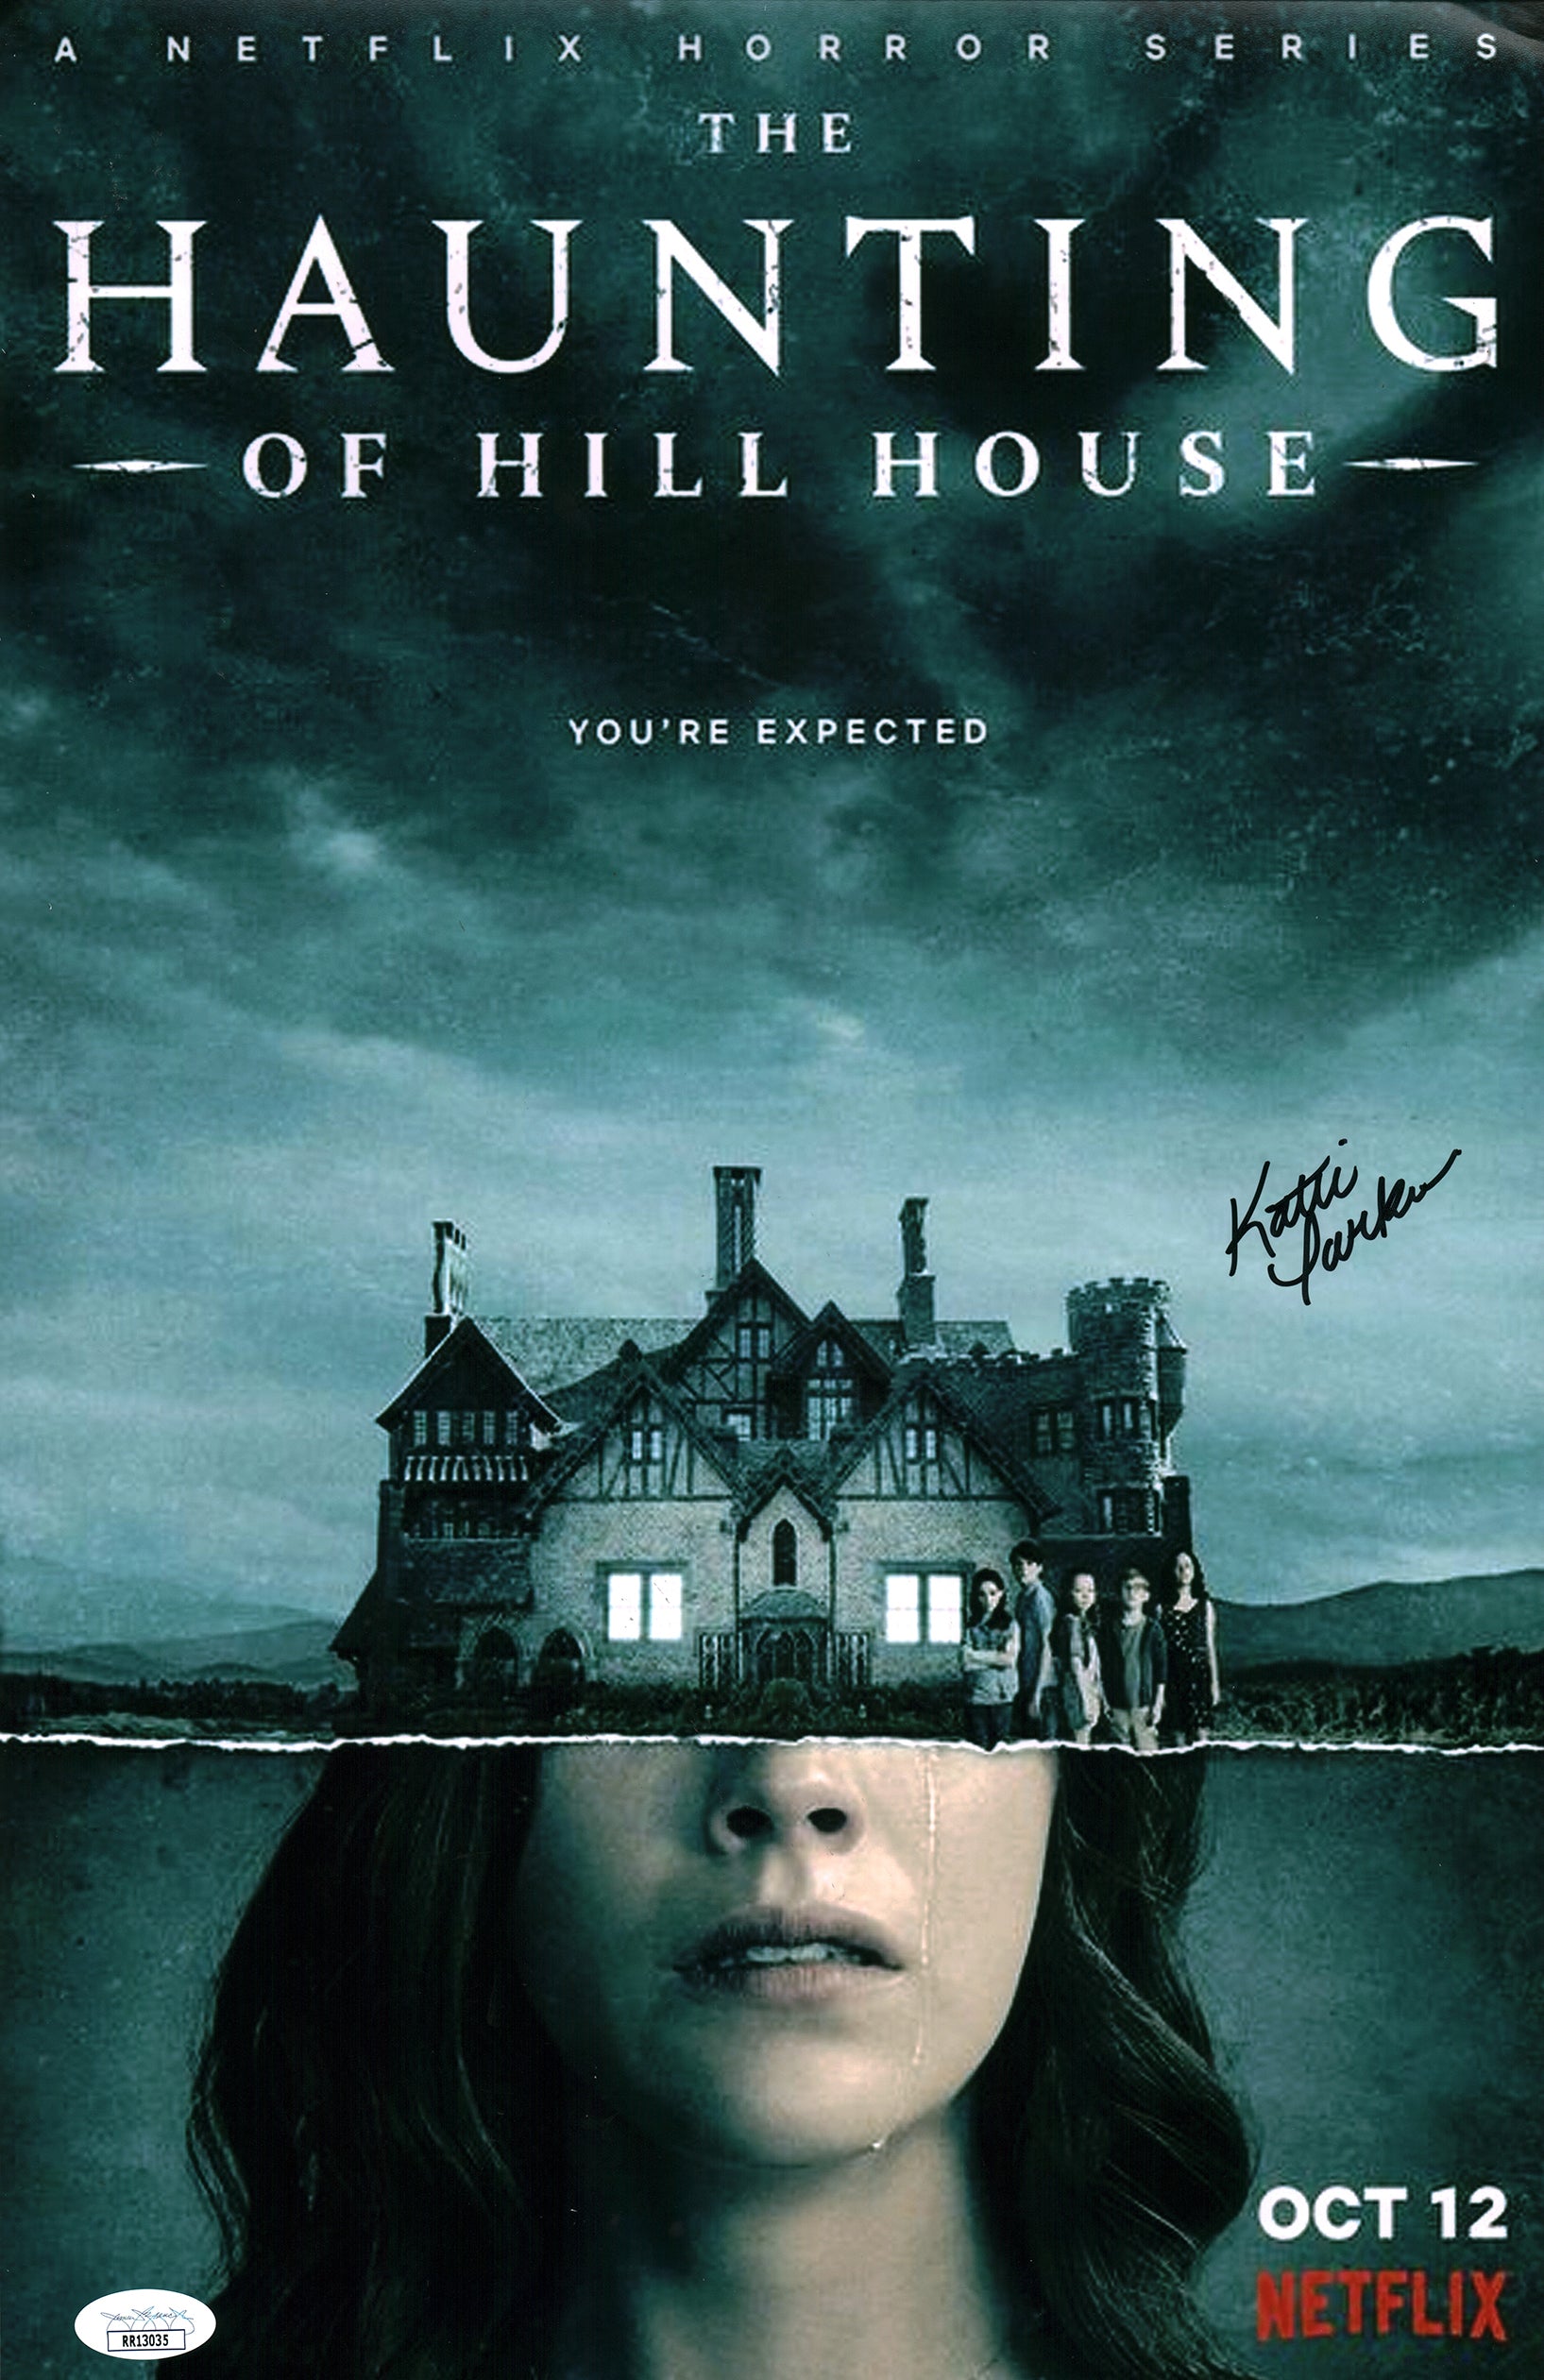 Katie Parker The Haunting of Hill House 11x17 Mini Poster Signed JSA Certified Autograph